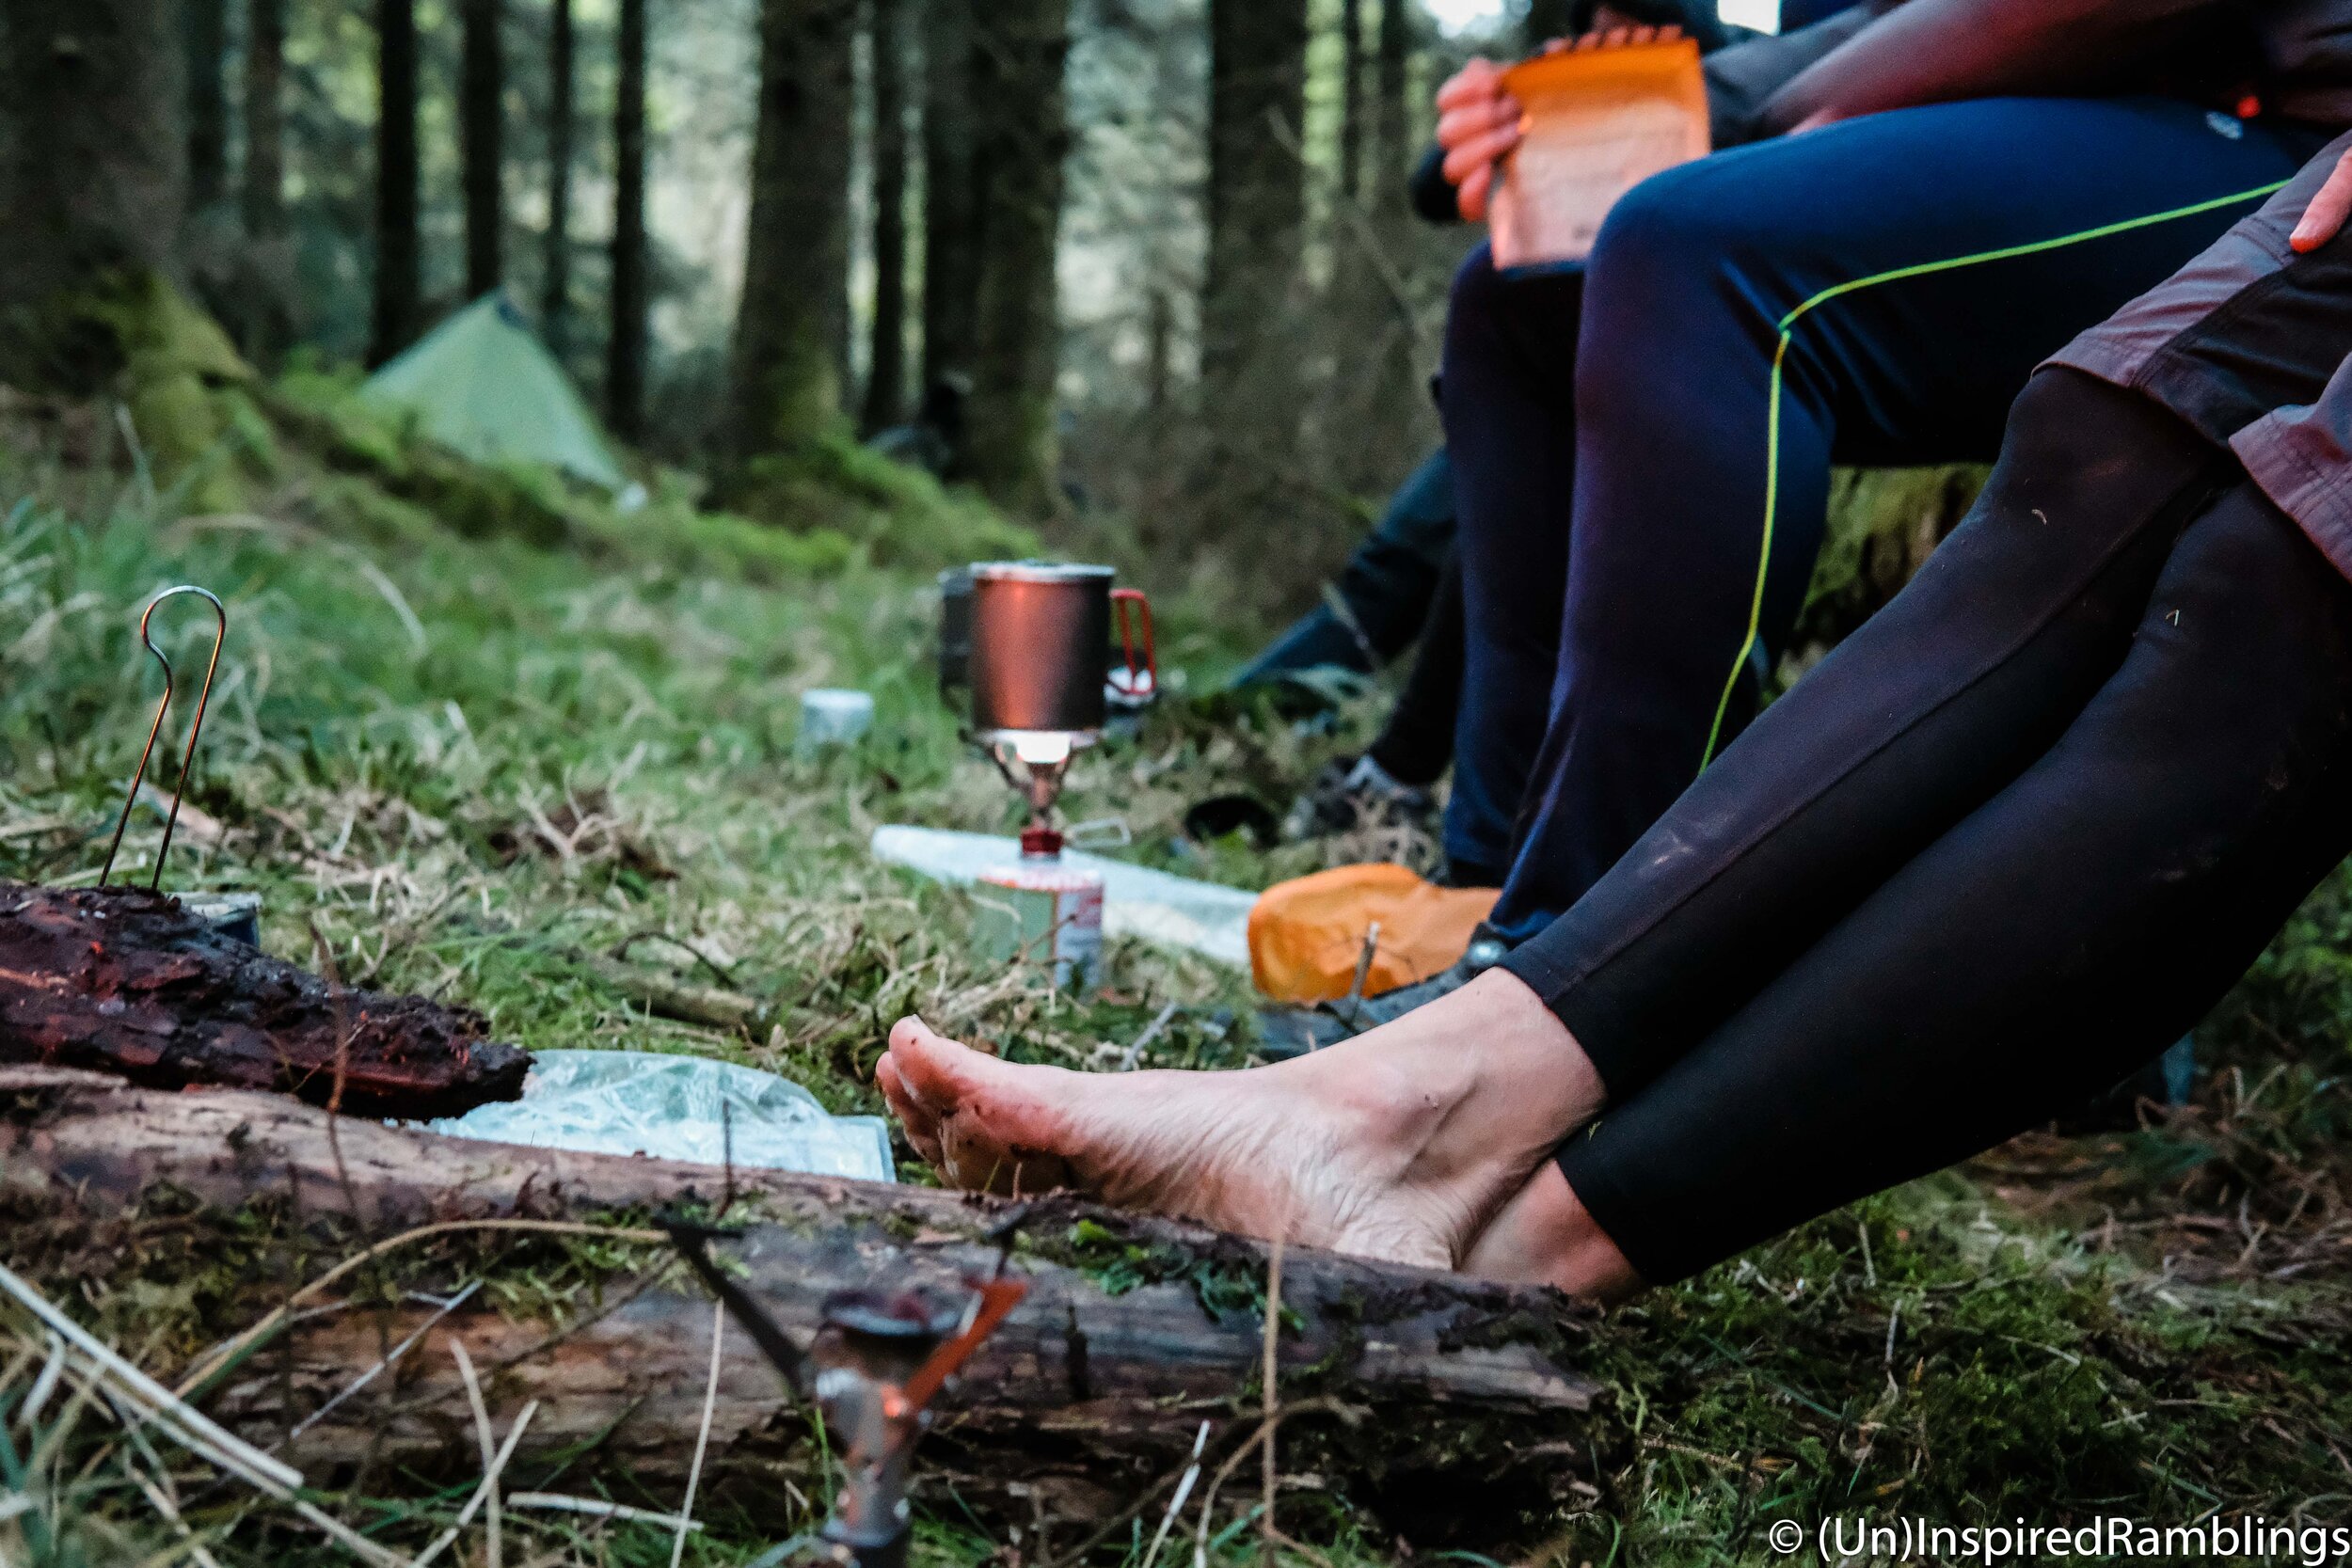 Welsh Ride Thing 2017 Wales Bikepacking Forest Camp Drying Feet